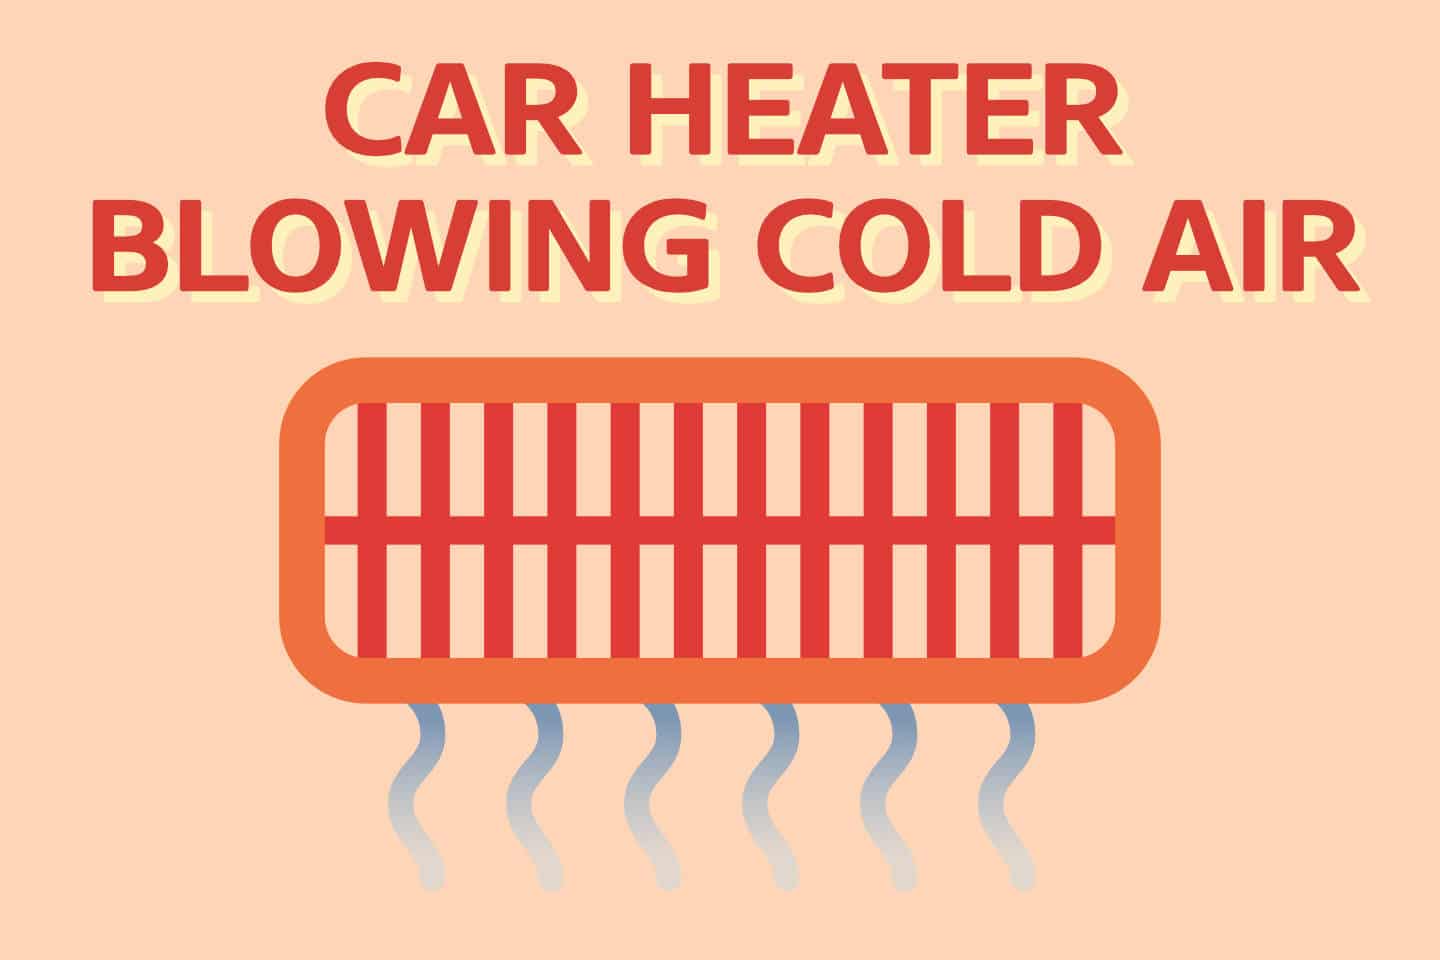 Why Your Car Heater Is Blowing Cold Air (6 REAL Reasons)